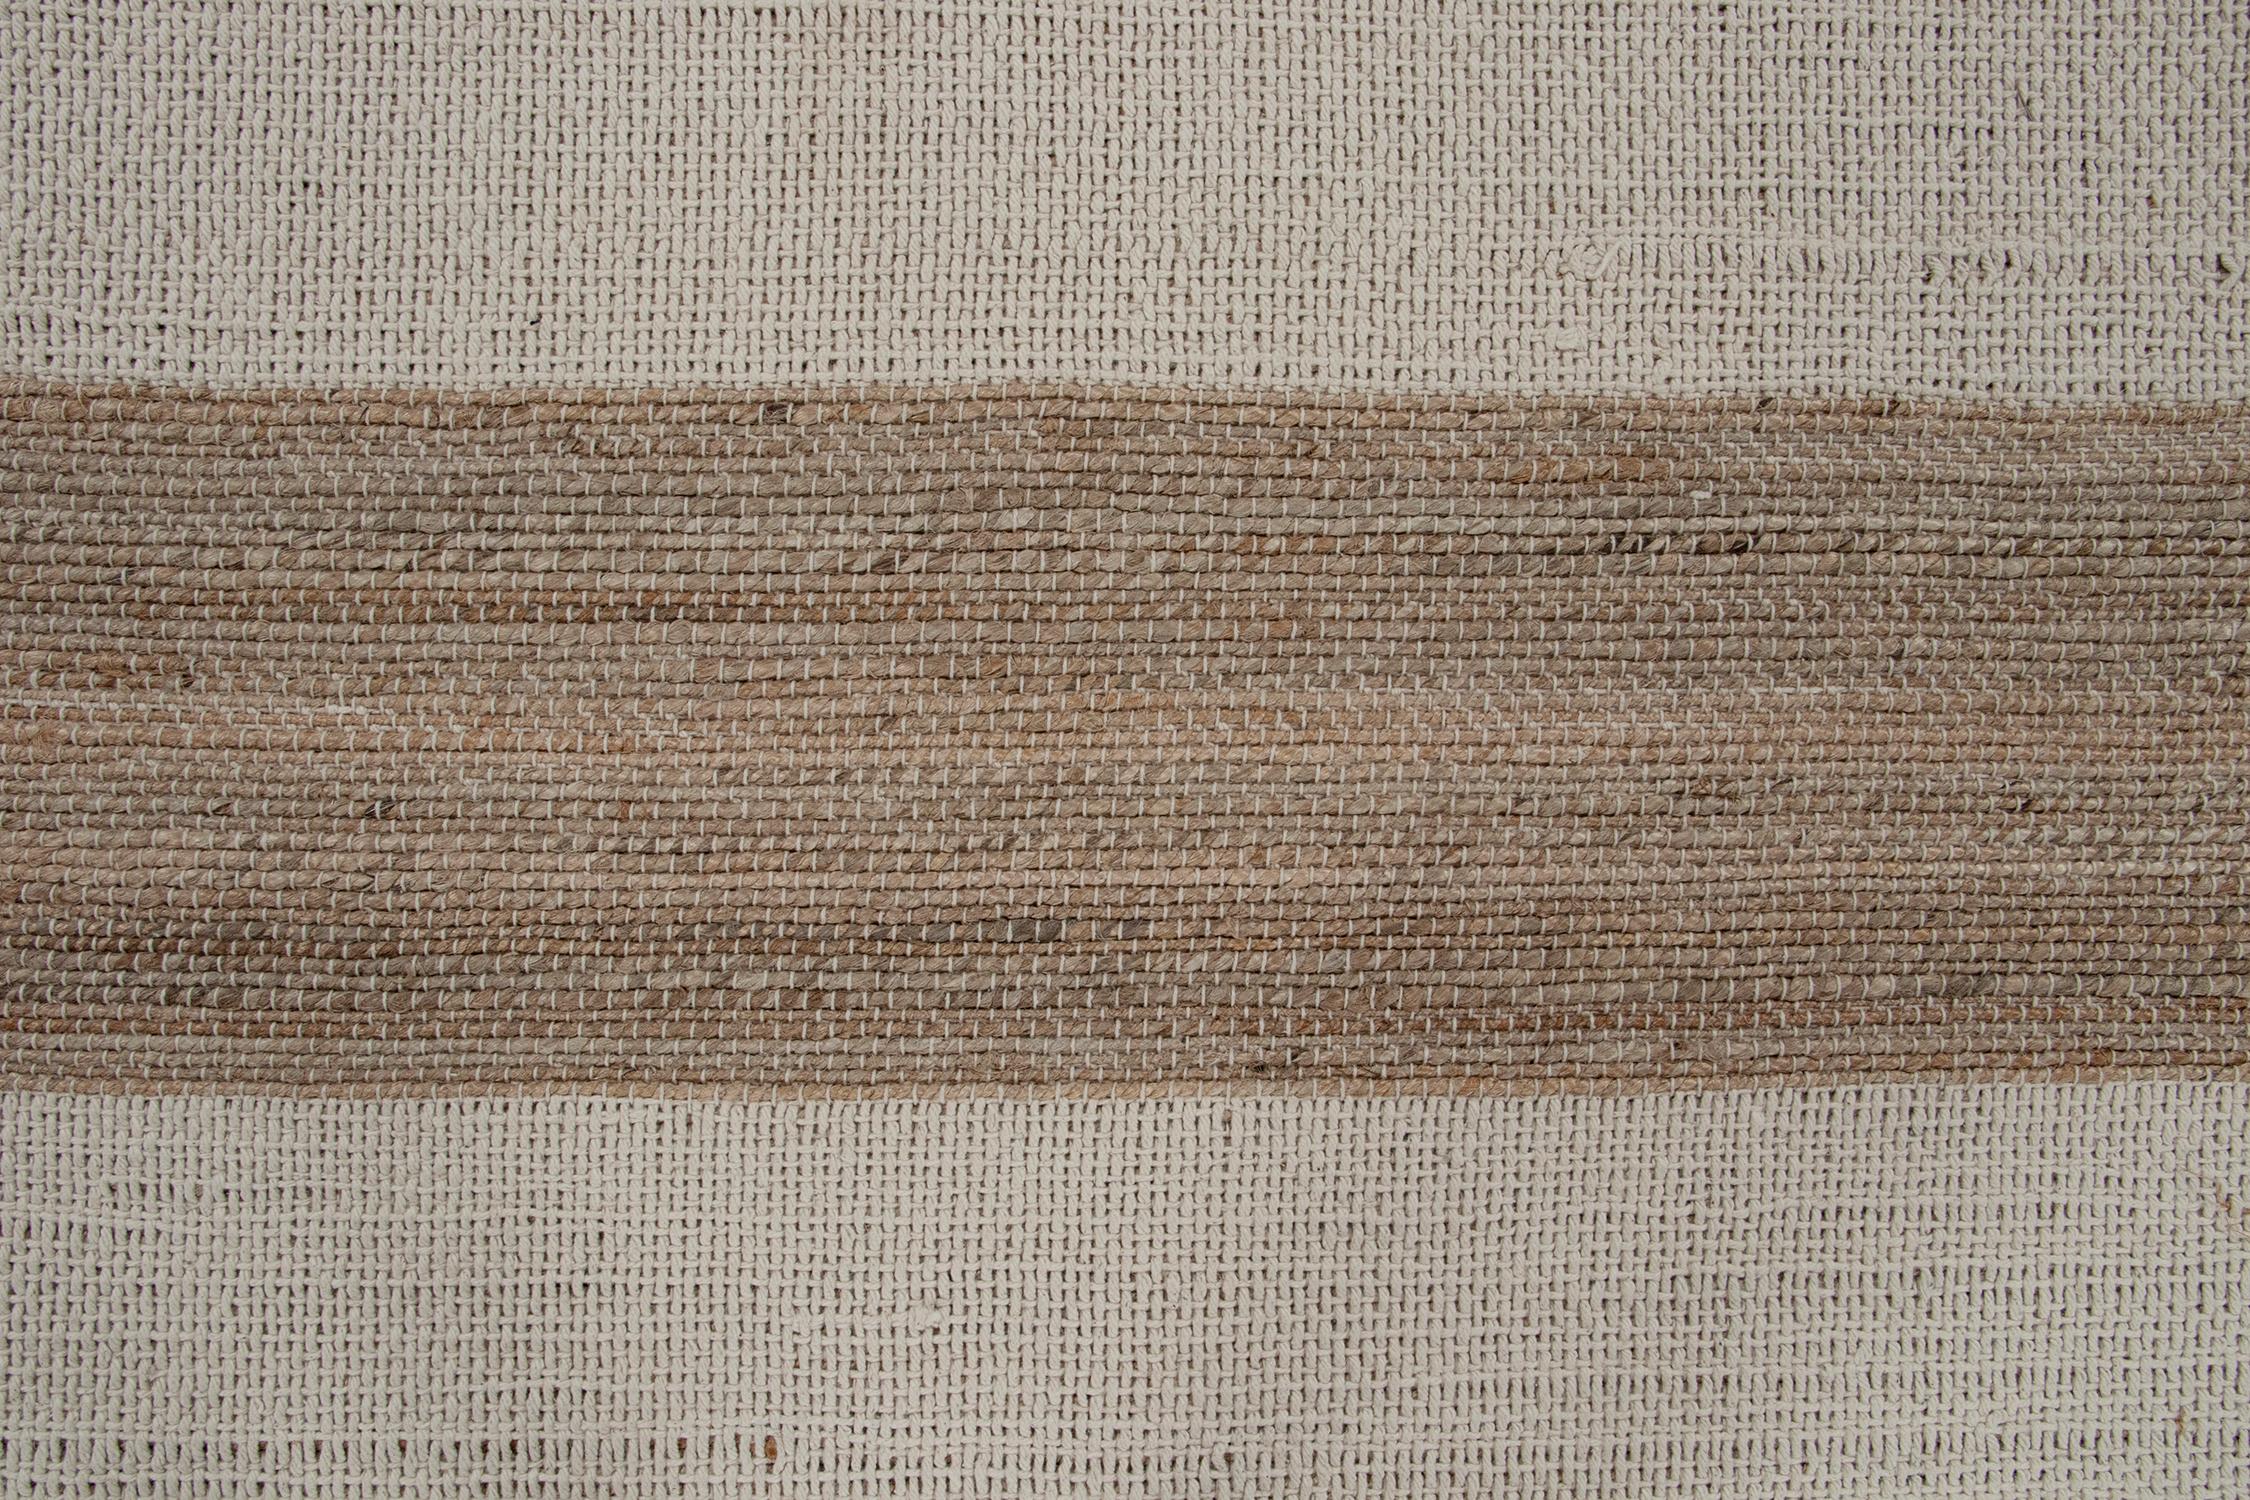 Wool Rug & Kilim’s Contemporary Jute Kilim in White and Beige-Brown Stripes For Sale